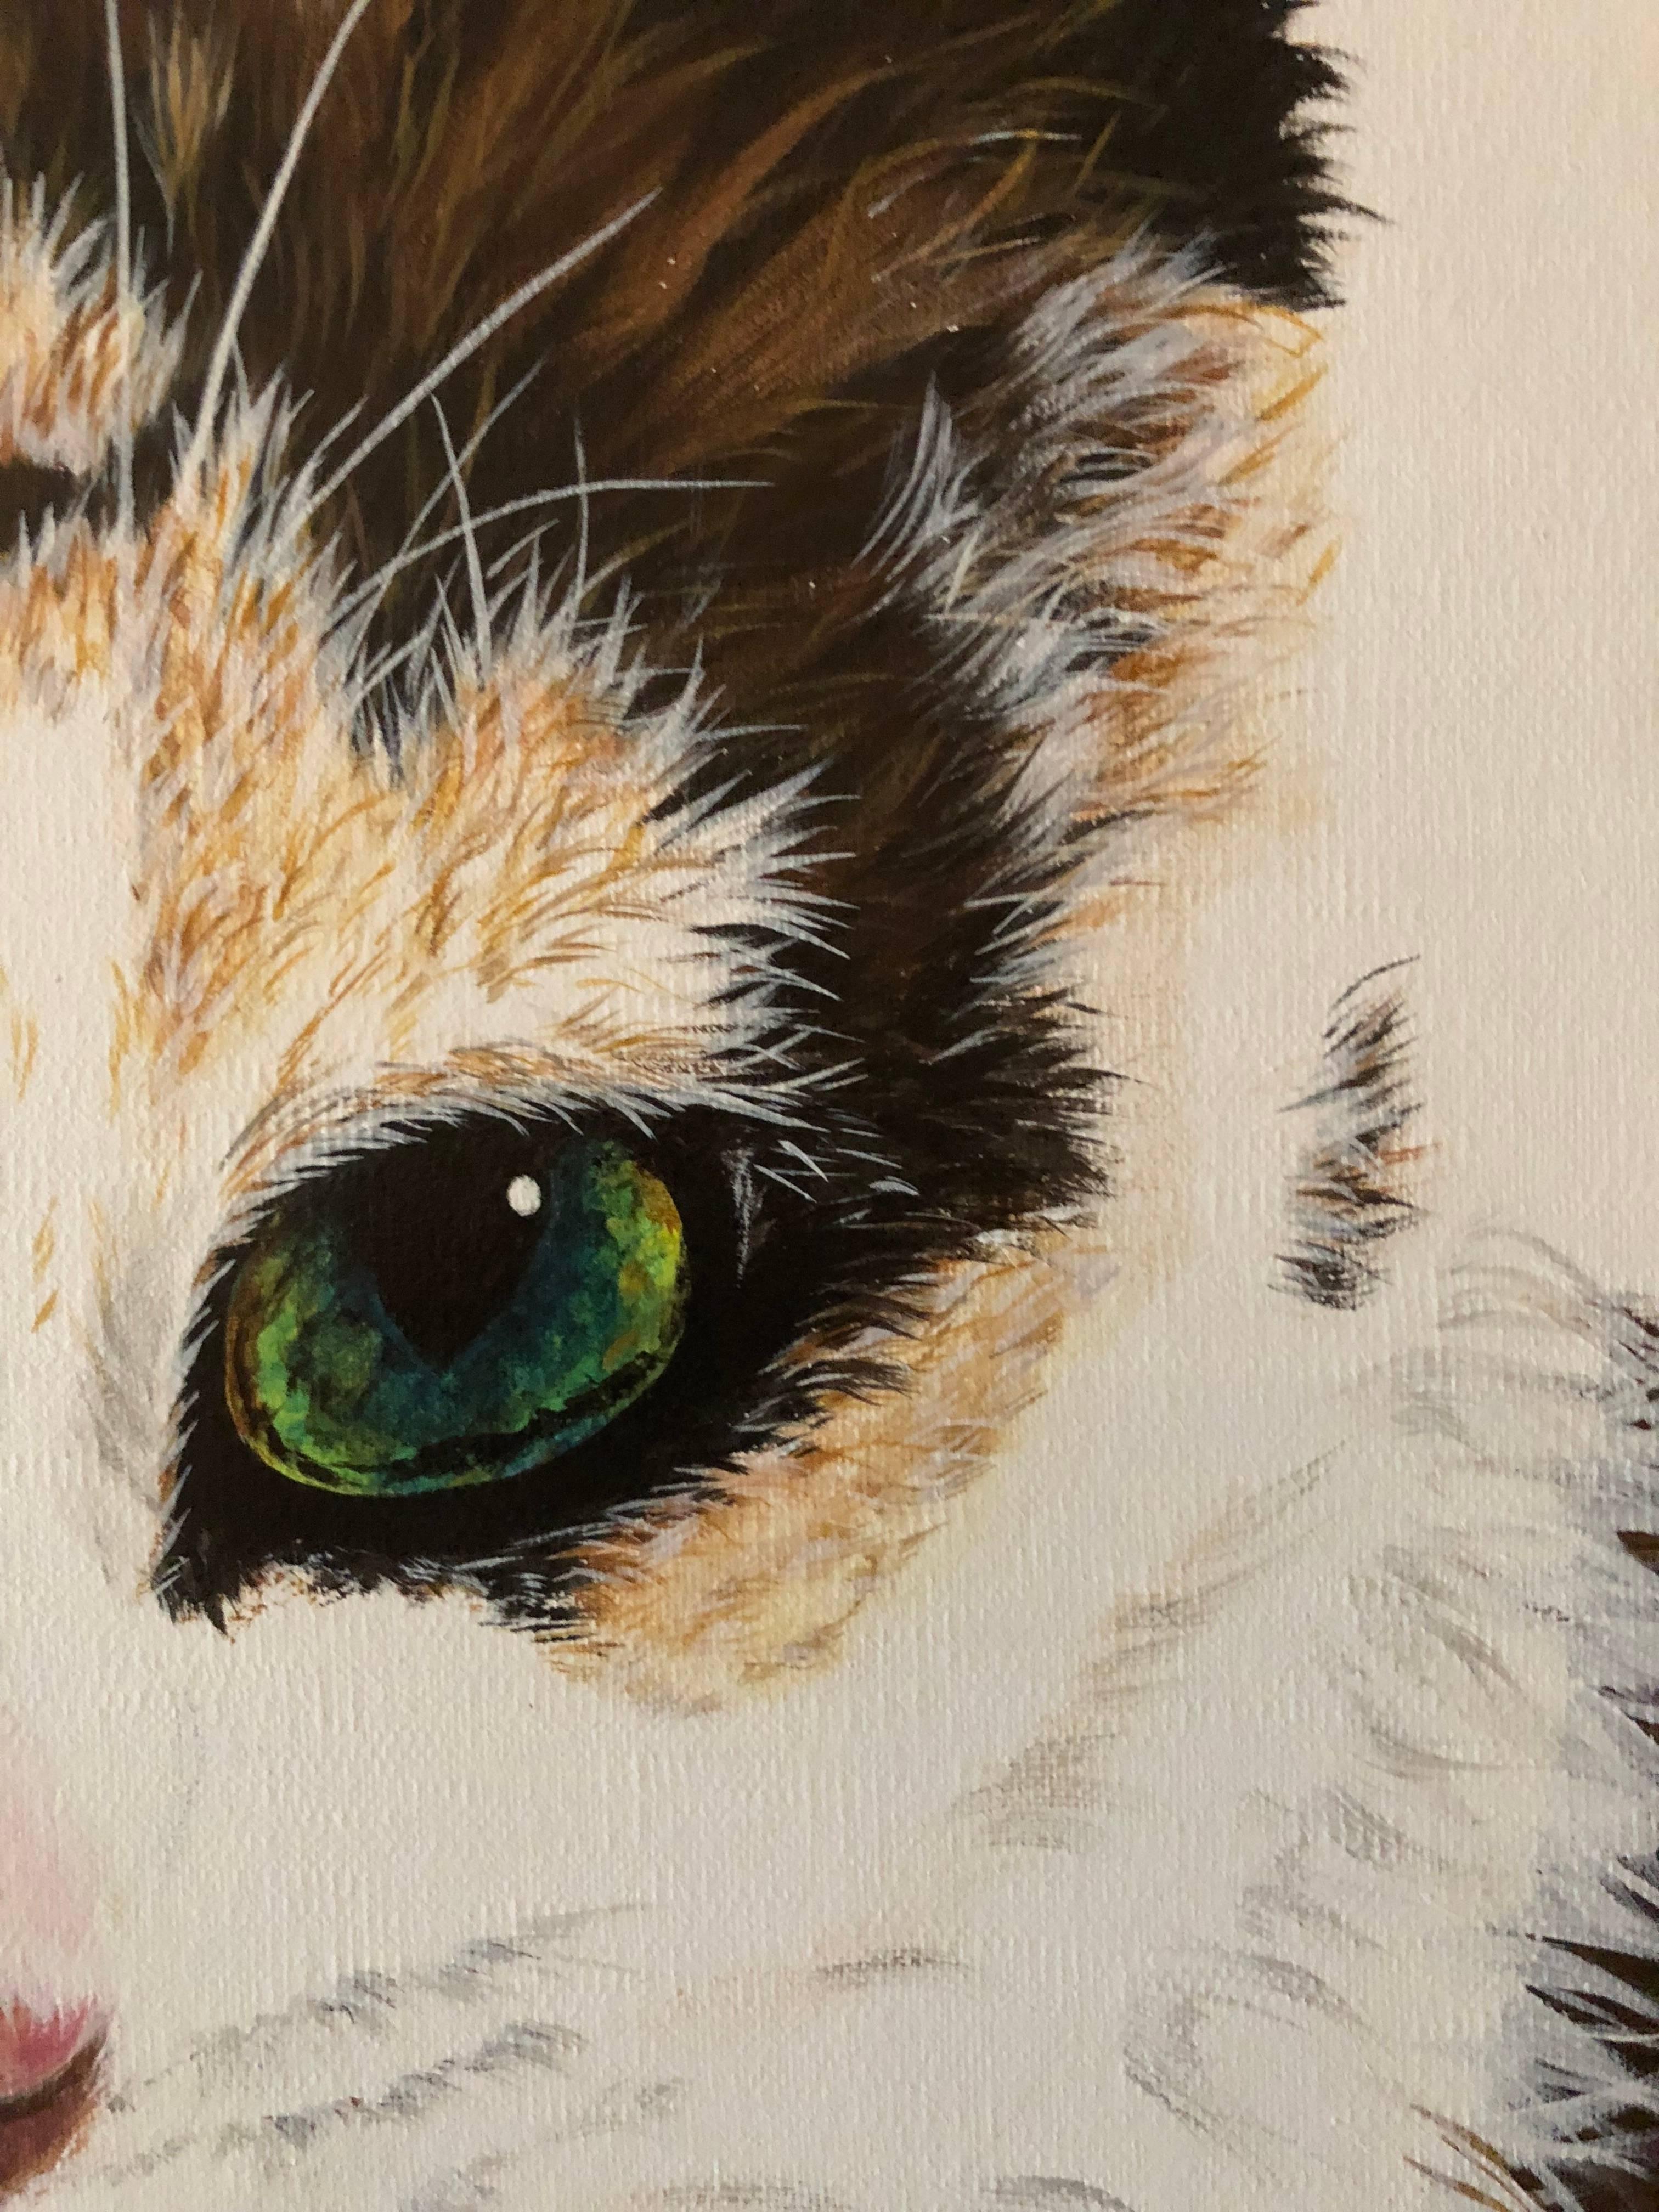 Deeply passionated with animals, the artist faithfully transpose every detail, every expression: absolute hyperrealism where animals can almost talk.